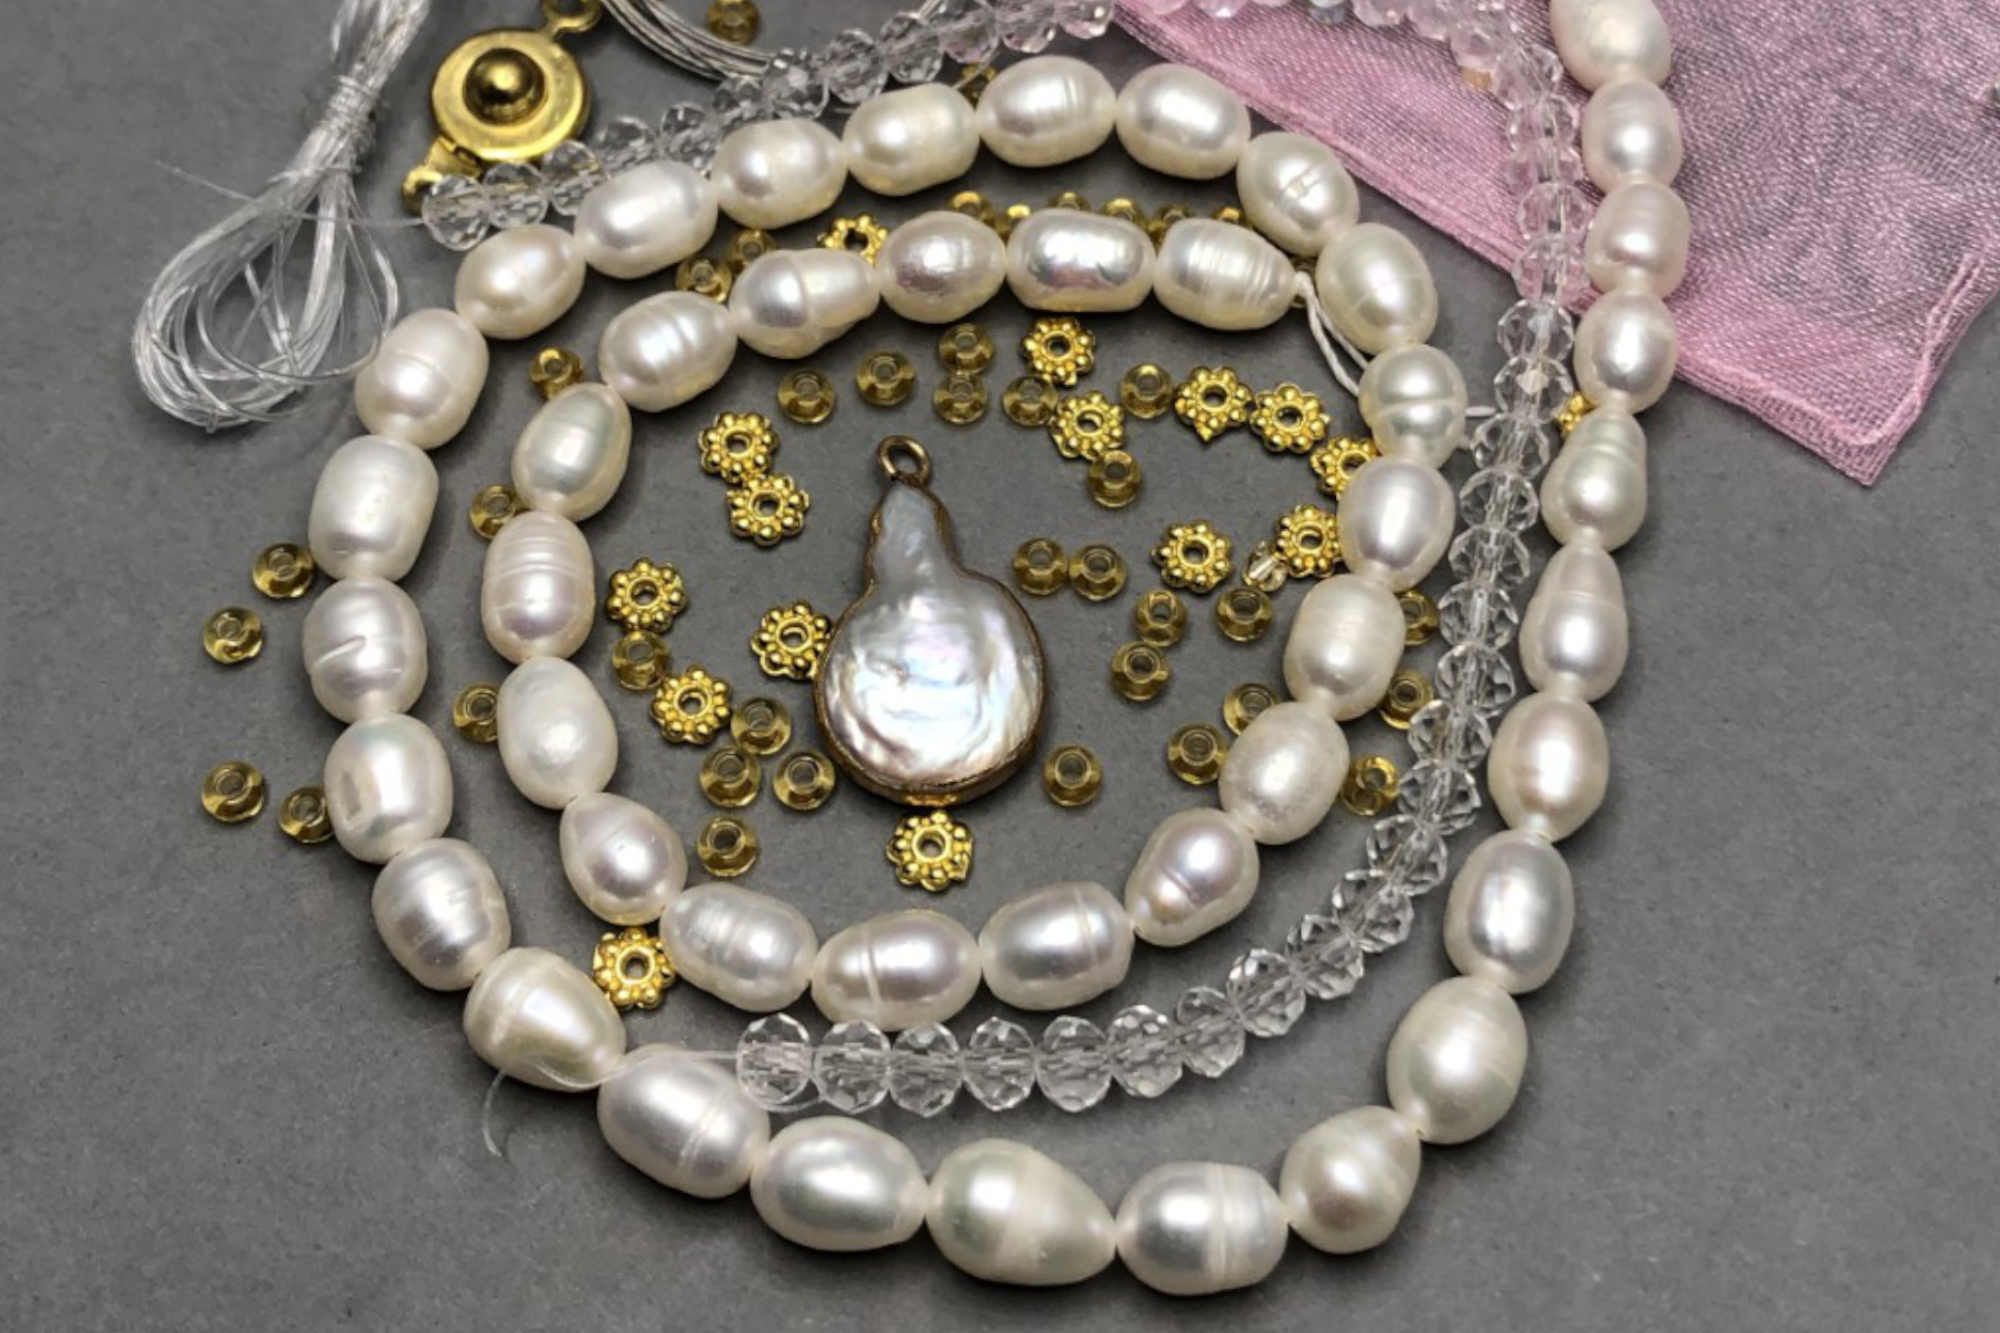 Freshwater Pearl Necklace Kit, Flat Droplet With Gold Edge Pendant